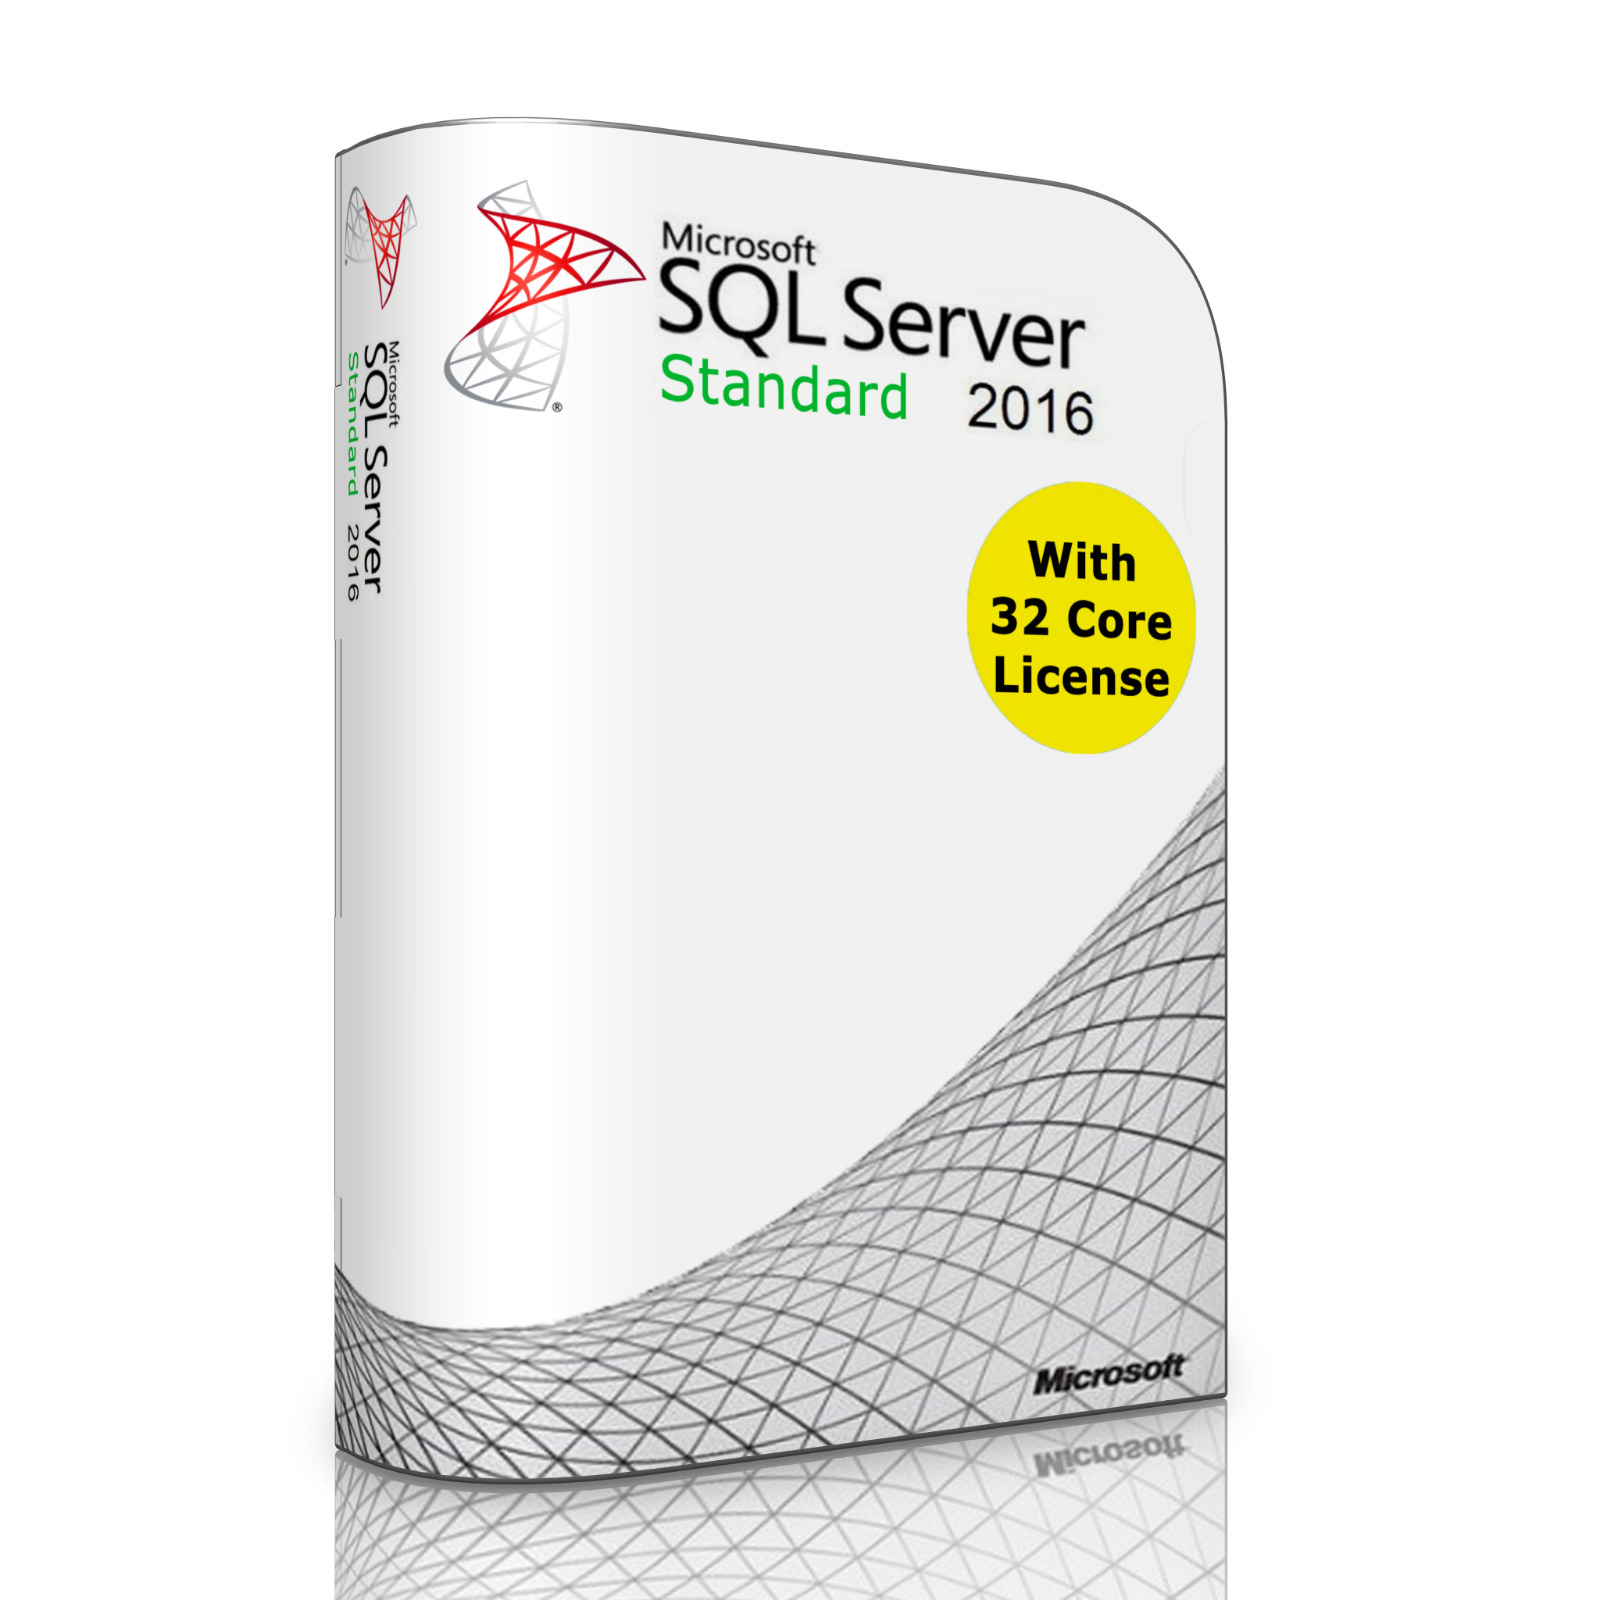 Microsoft SQL Server 2016 Standard with 32 Core License unlimited User CALs, New